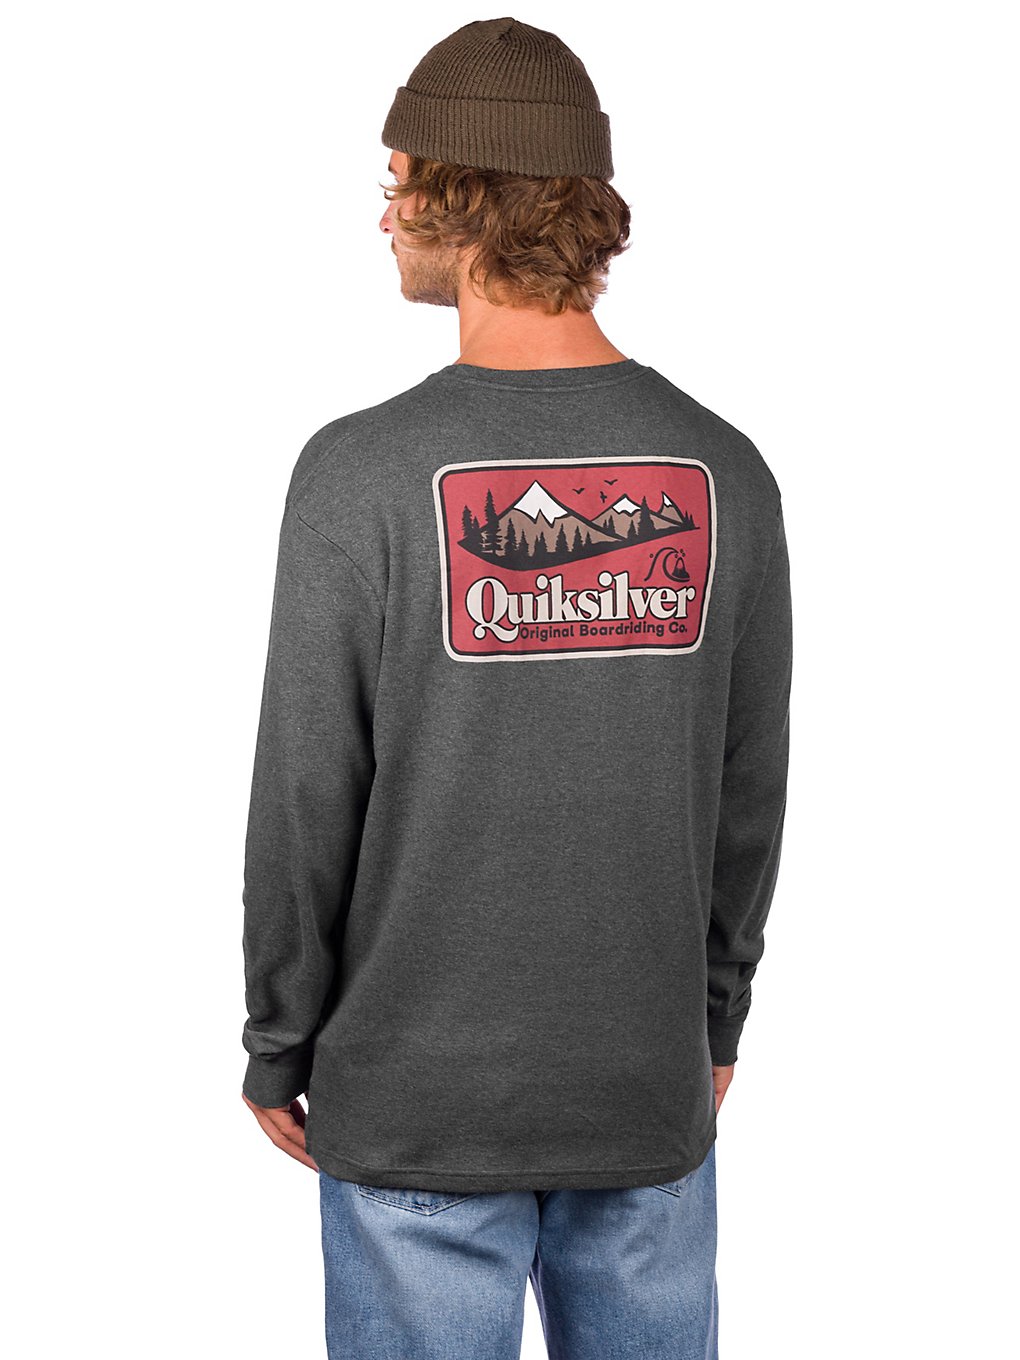 Quiksilver Old Habit Long Sleeve T-Shirt charcoal heather